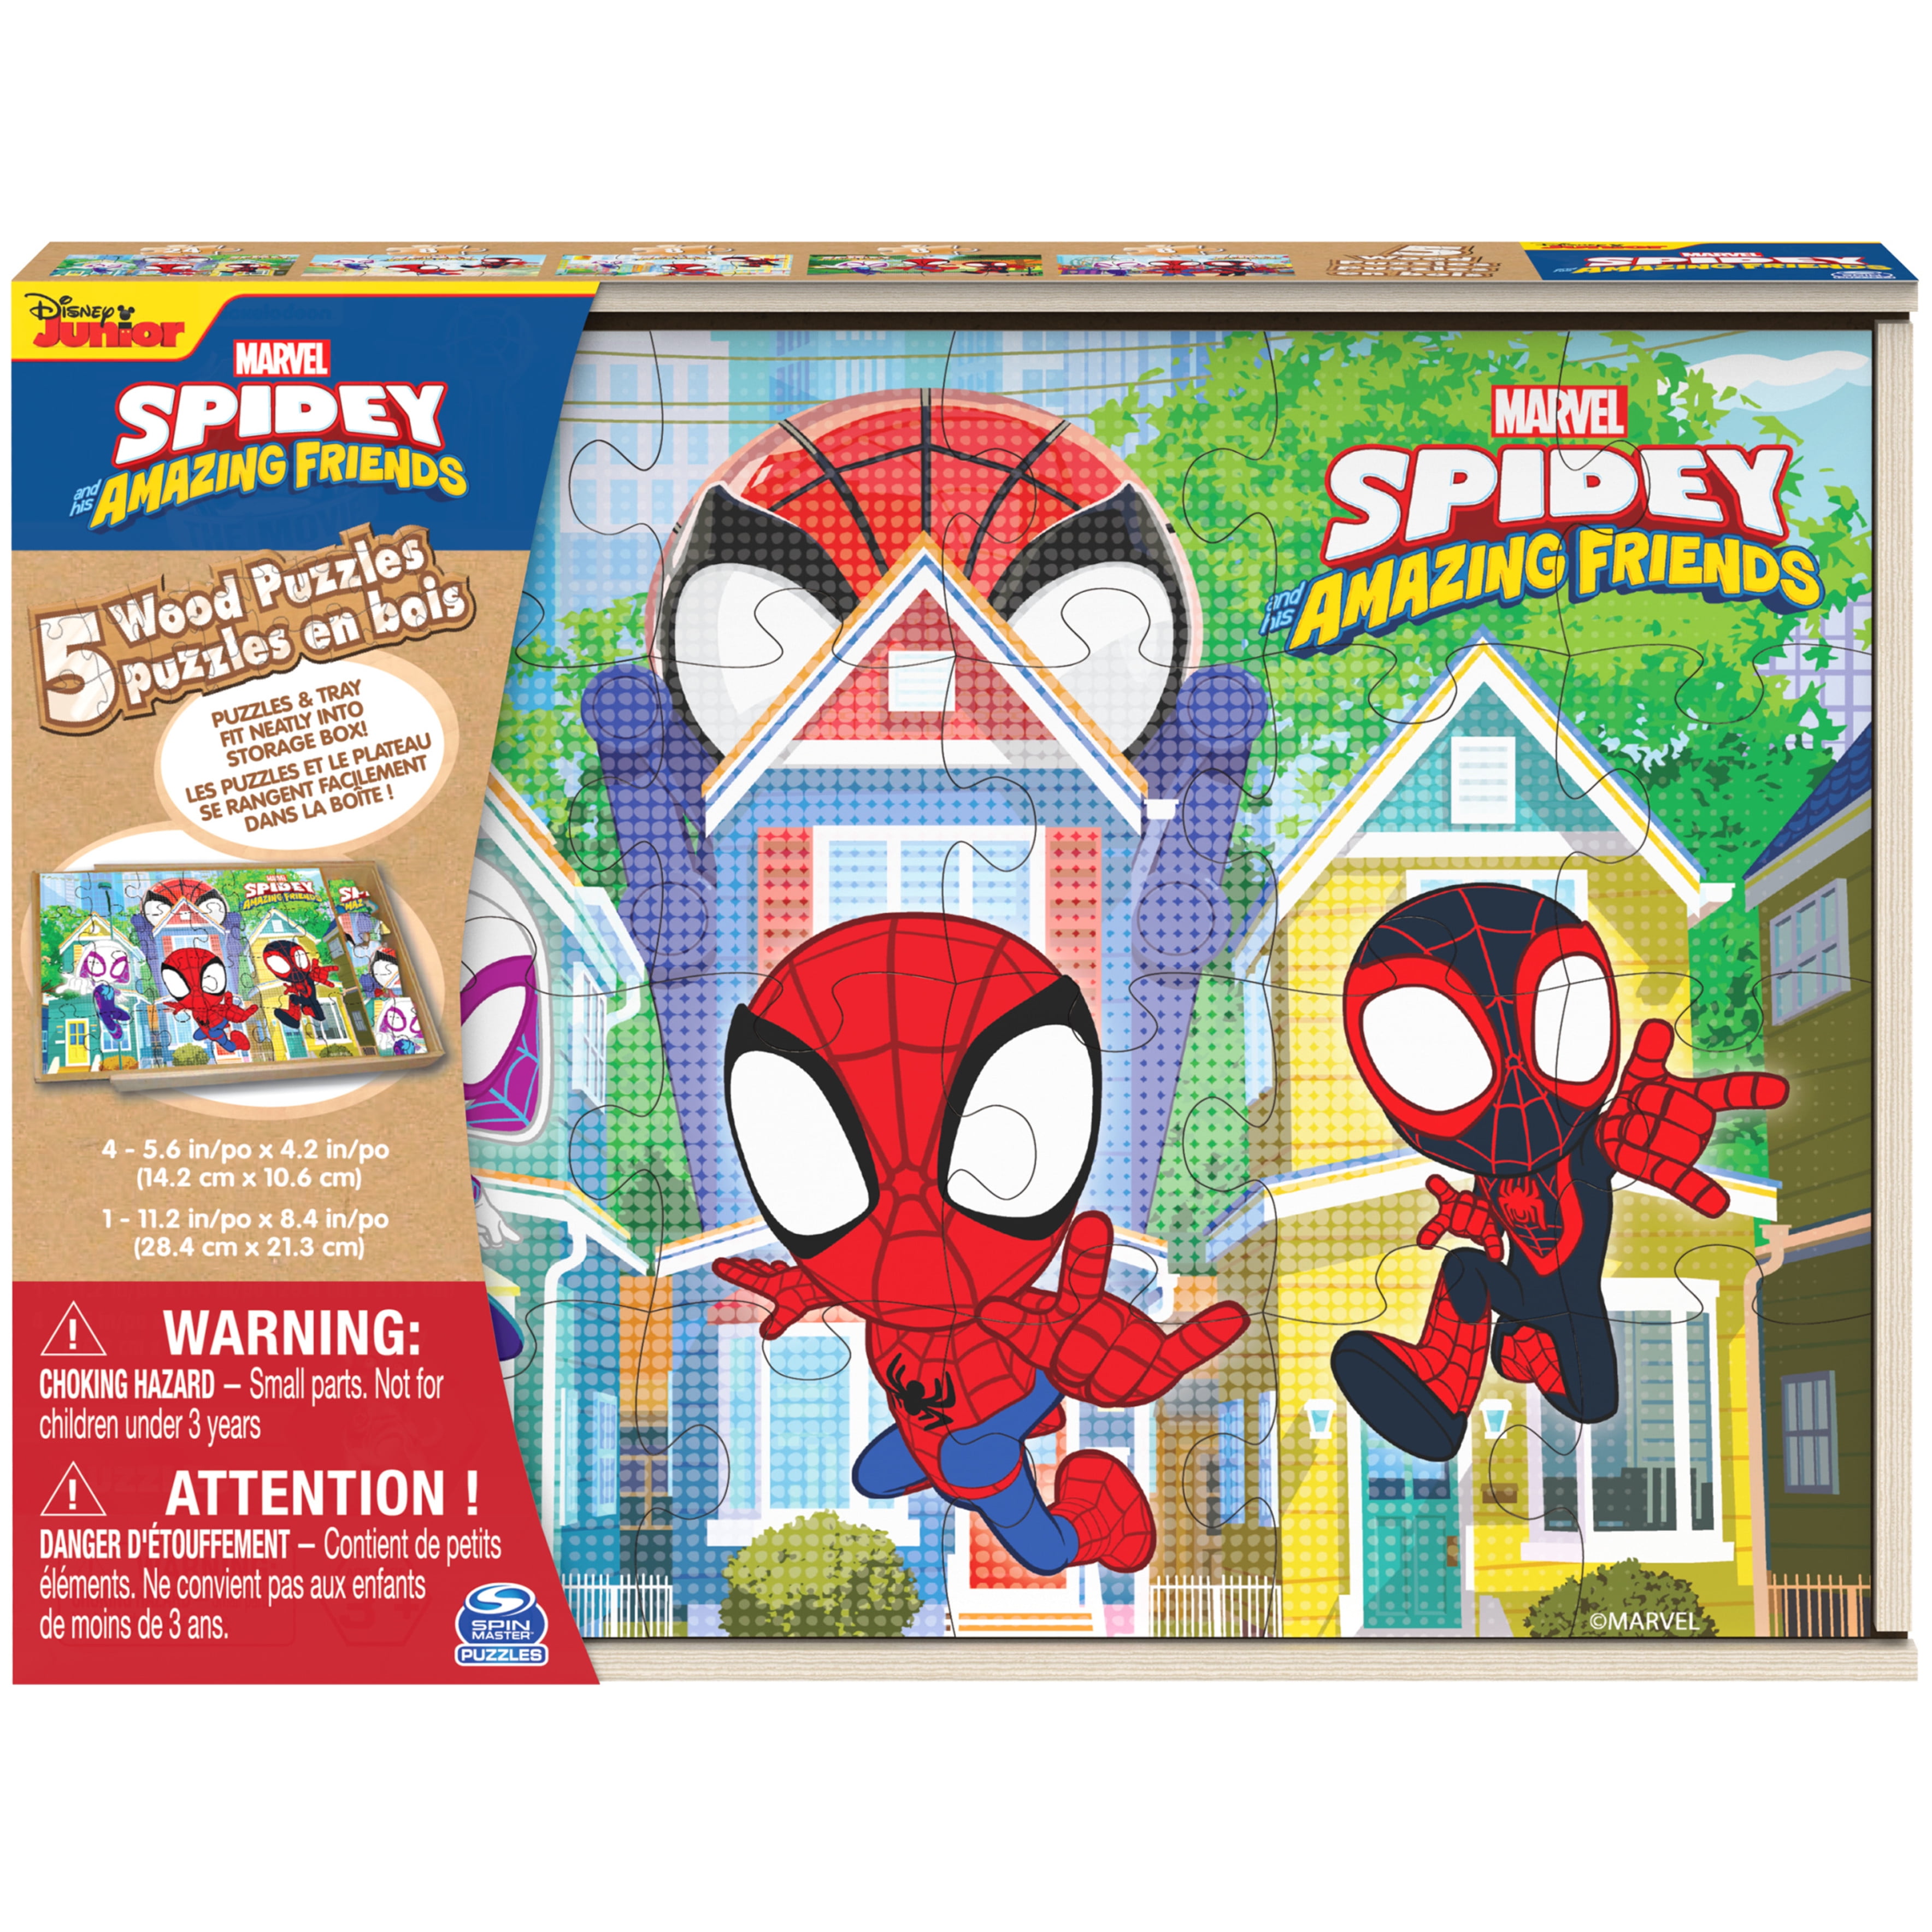 NEW OFFICIAL DISNEY SPIDERMAN FROZEN JIGSAW PUZZLES TRIO PUZZLE GAME 3 IN 1 